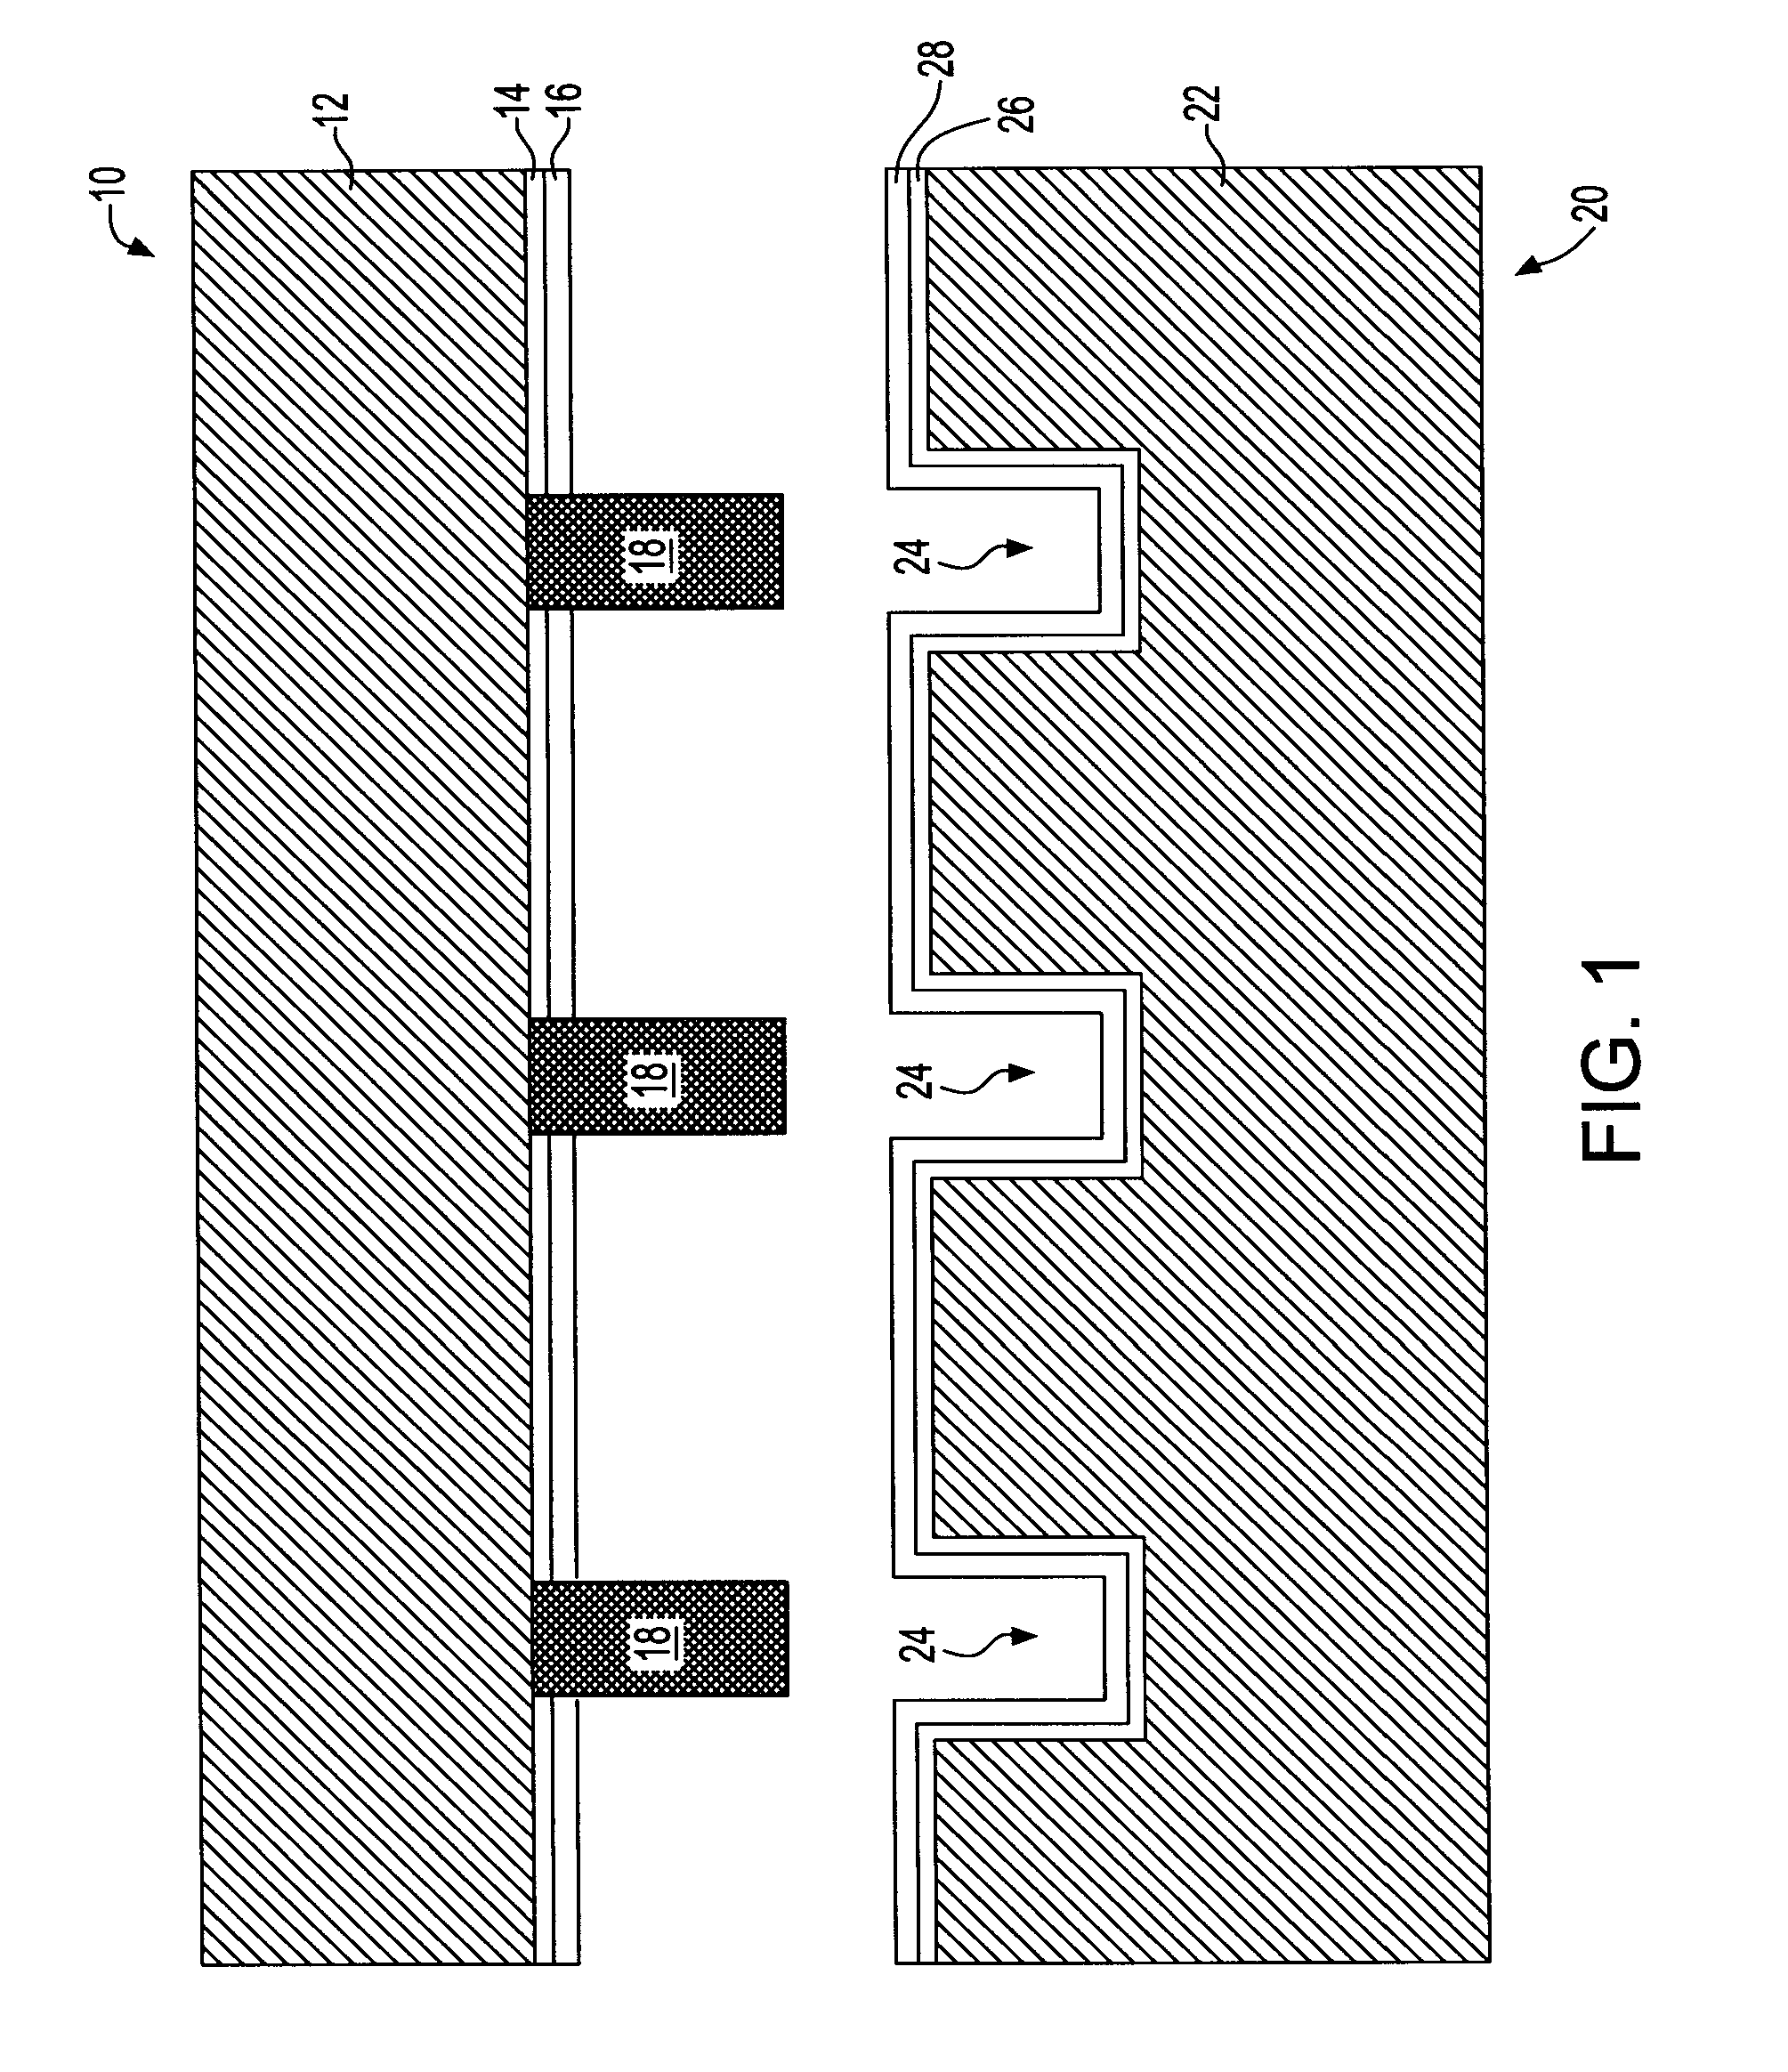 Metal filled through via structure for providing vertical wafer-to-wafer interconnection